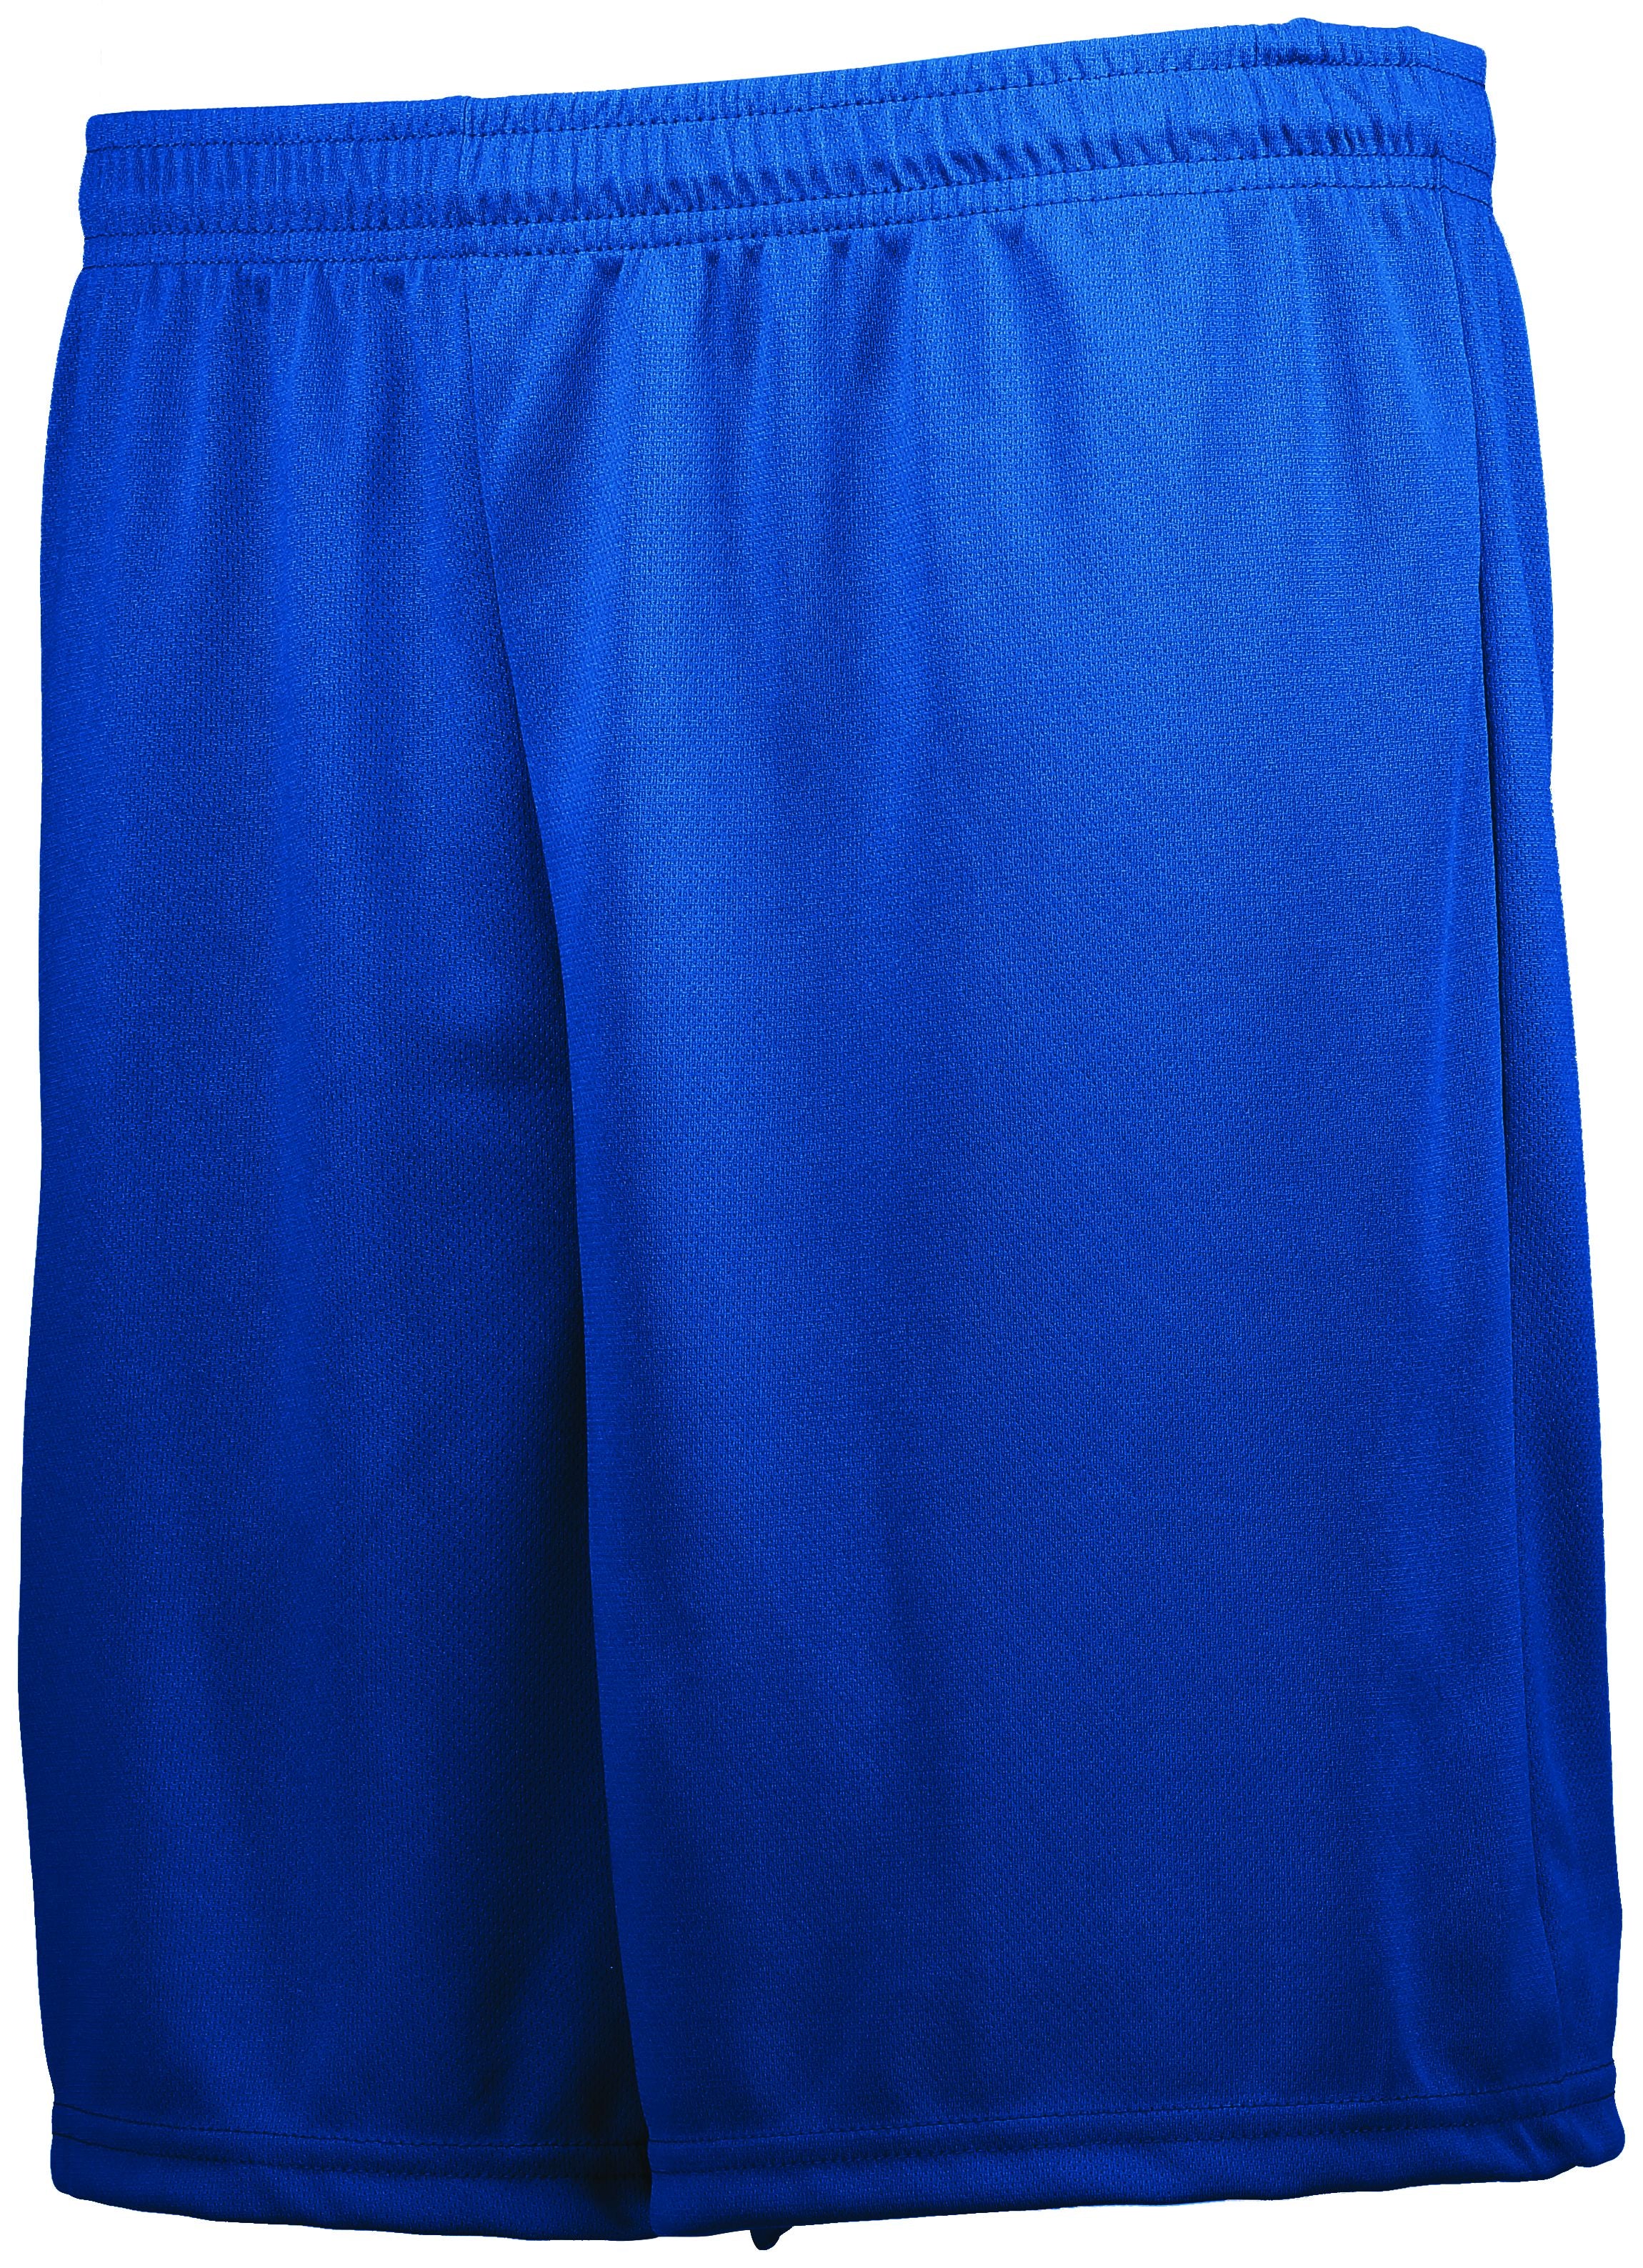 High 5 Prevail Shorts in Royal  -Part of the Adult, Adult-Shorts, High5-Products, Soccer, All-Sports-1 product lines at KanaleyCreations.com